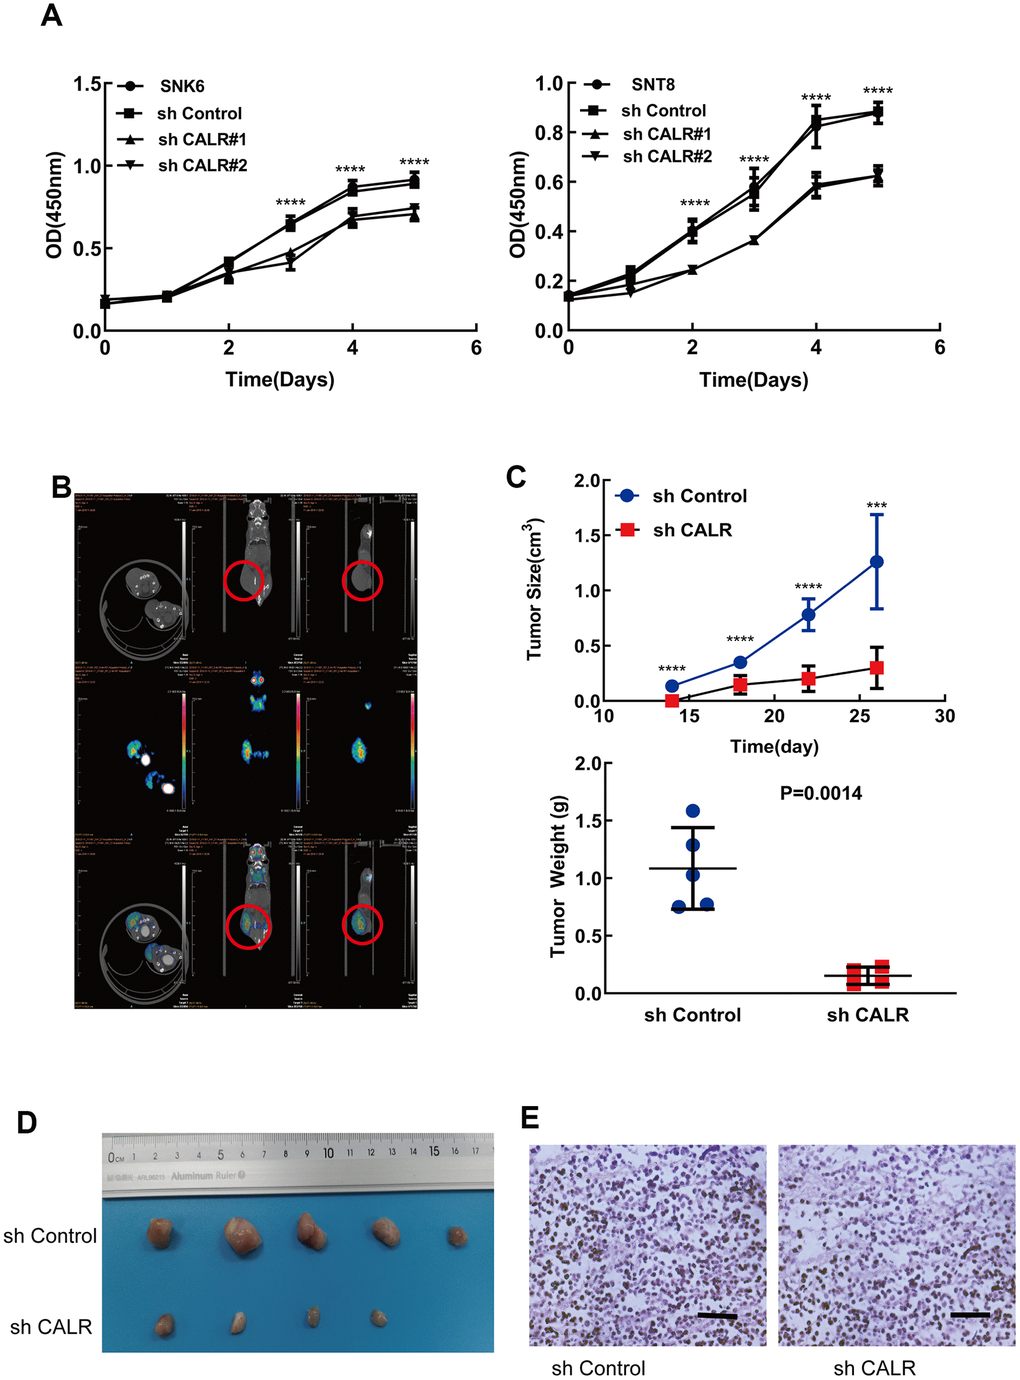 CALR knockdown suppresses in vitro and in vivo NKTCL cell growth. (A) CCK-8 assay results show the viability of SNK6 and SNT8 cells transfected with shCALR #1, shCALR #2 or shControl. (B) Representative images show the xenograft tumors at 14 days in mice subcutaneously injected with the shControl-transfected SNK6 cells. The red circles indicate visible tumors. (C, D) Xenograft tumor growth analysis shows the tumor volume and weight in mice subcutaneously injected with CALR knockdown SNK6 cells in comparison with those injected with shControl-transfected SNK6 cells. Knockdown of CALR inhibited tumor formation of the SNK6 cells in vivo (C, upper panel and D). The tumor weight was significantly reduced in the CALR-silenced group compared to the control group (C, lower panel). (E) Representative H&E stained sections show the morphology of xenograft tumors derived from mice injected subcutaneously with shControl or CALR-knockdown SNK6 cells (bar=200μm). Note: The data are shown as means ± standard deviation; **** P P 